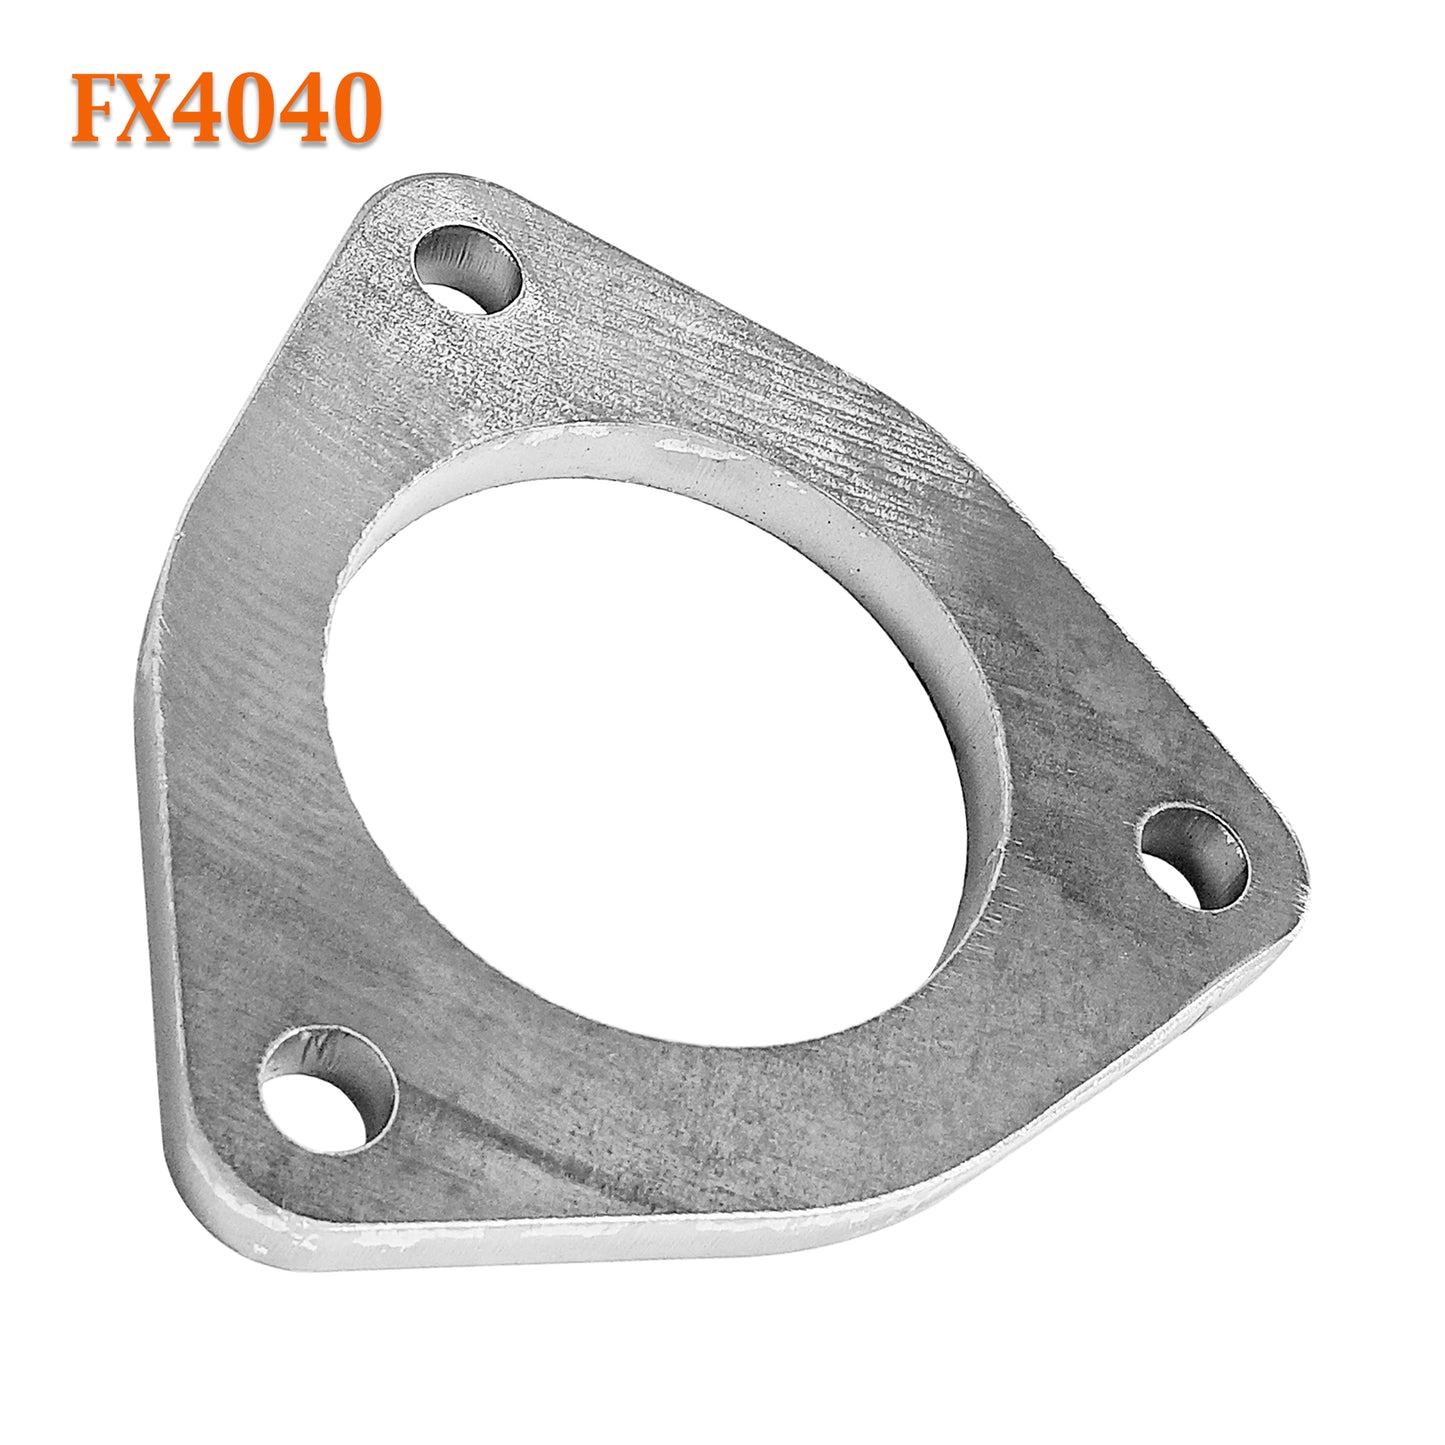 FX4040 2 1/2" ID Flat Triangle Three Bolt Exhaust Flange For 2.375" - 2.5" Pipe